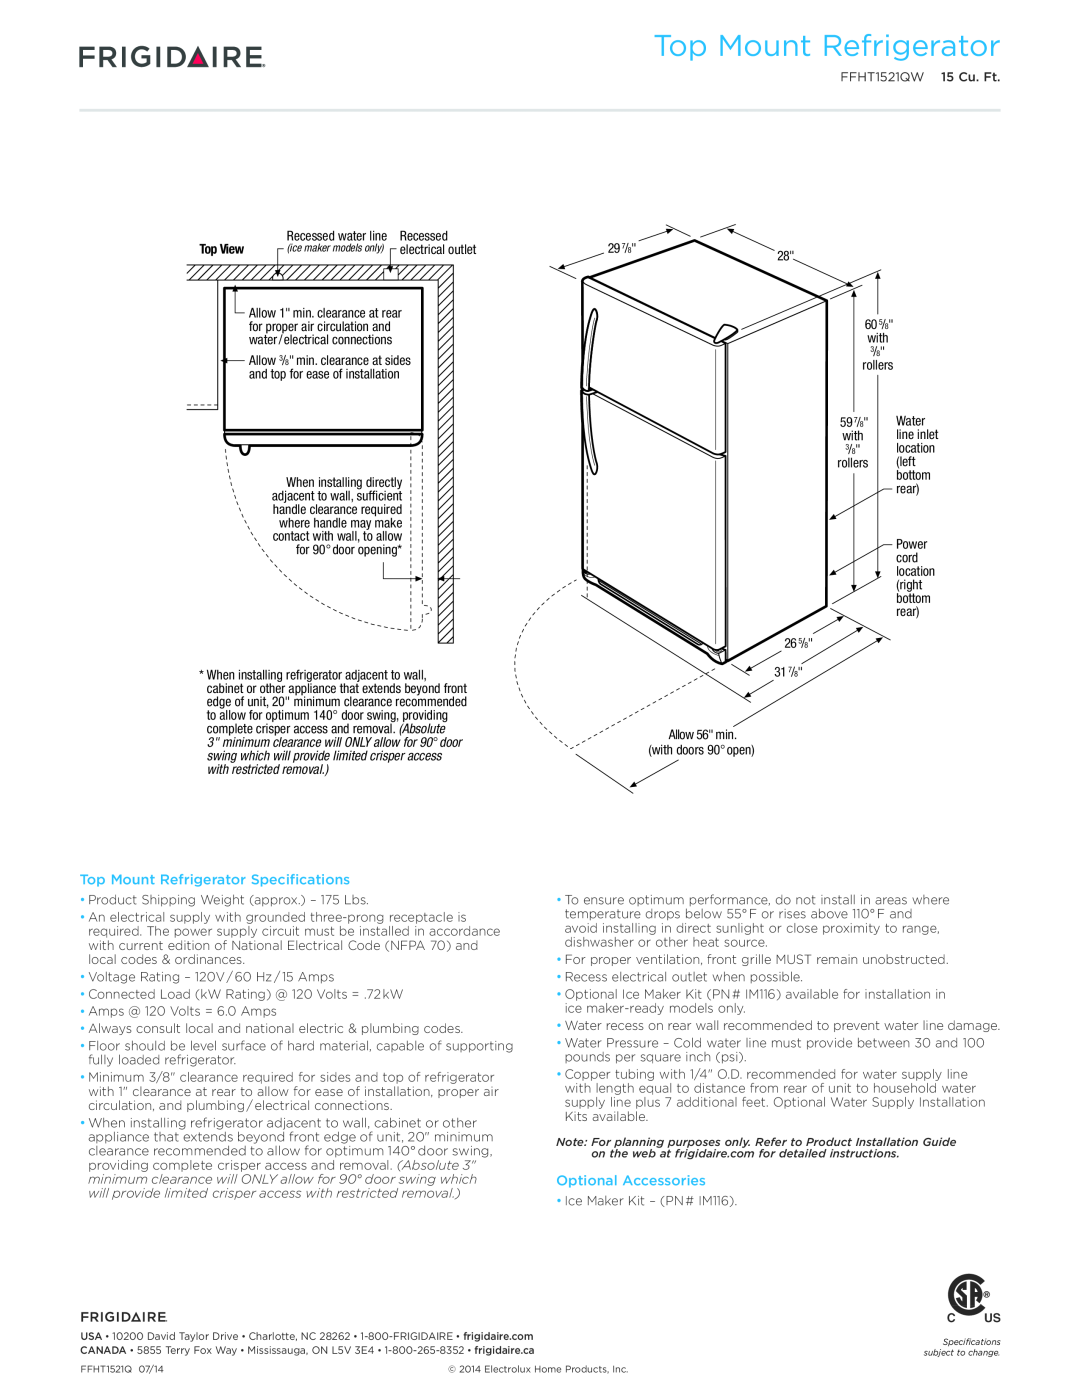 Frigidaire FFHT1521QW dimensions Top Mount Refrigerator Specifications, Optional Accessories, Top View, Recessed 